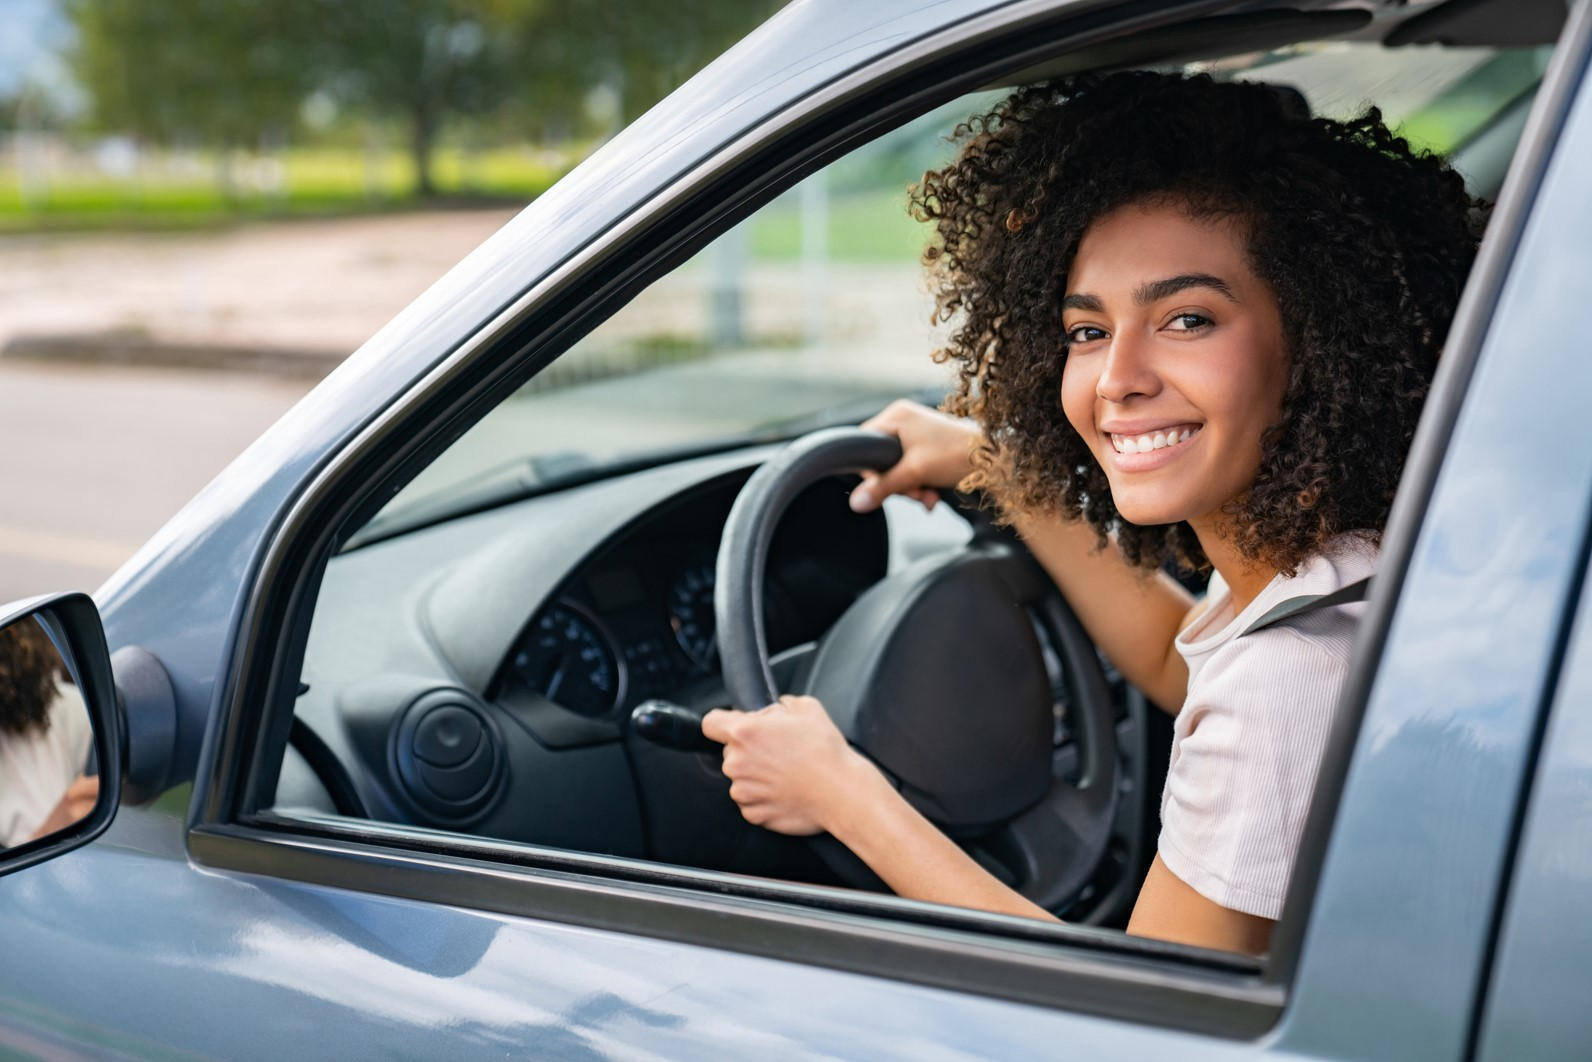 A happy young woman driving her car and smiling at the camera through the window